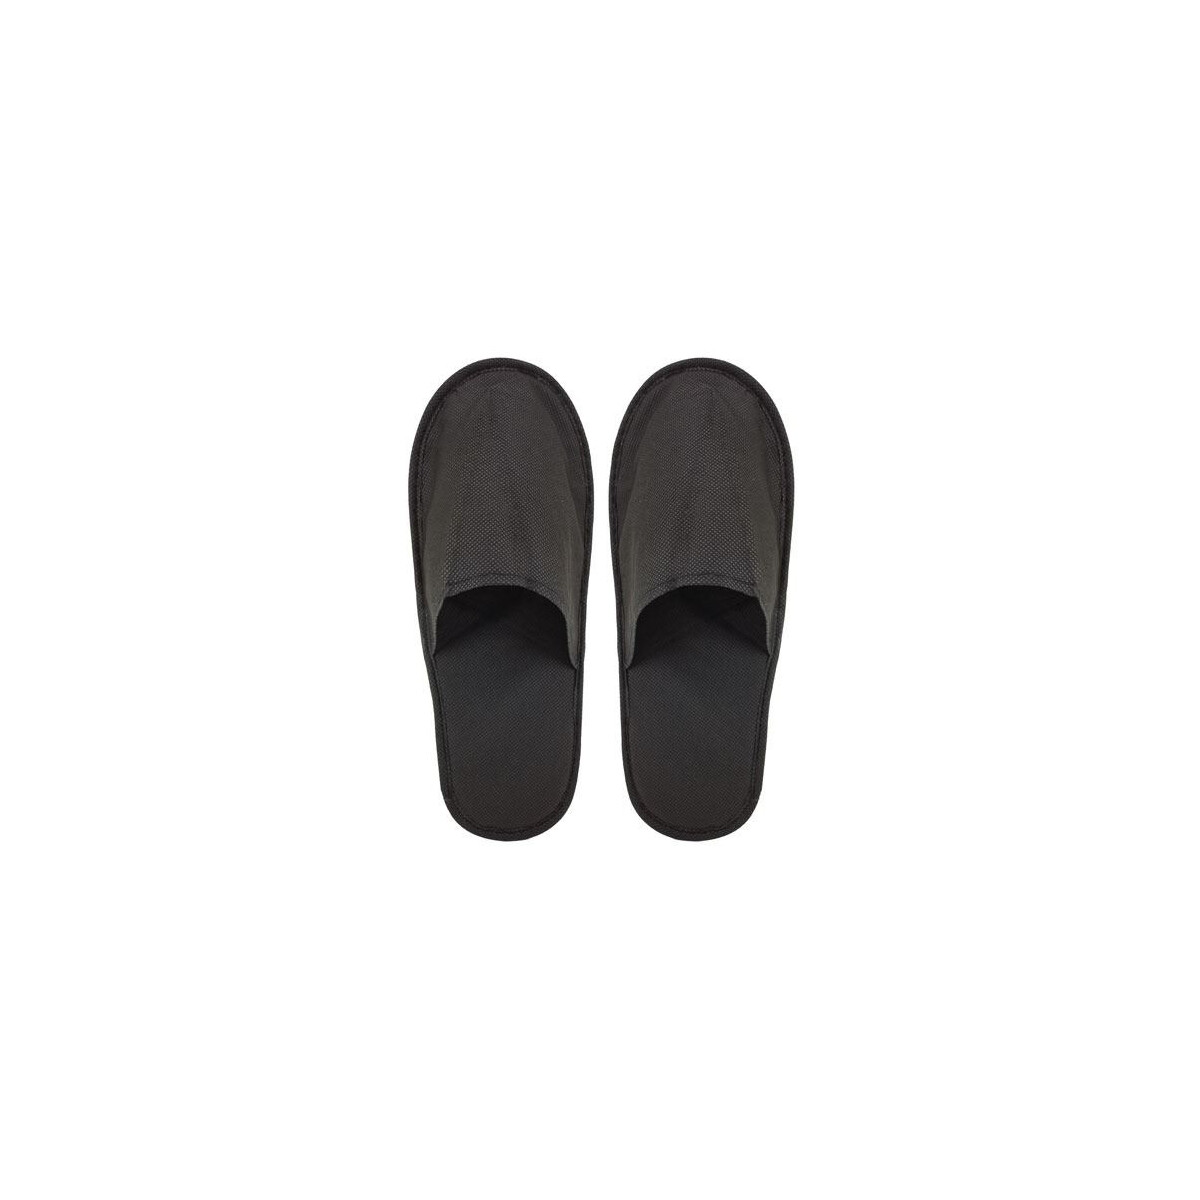 Eco Slipper with non-slip sole (pair bagged) black